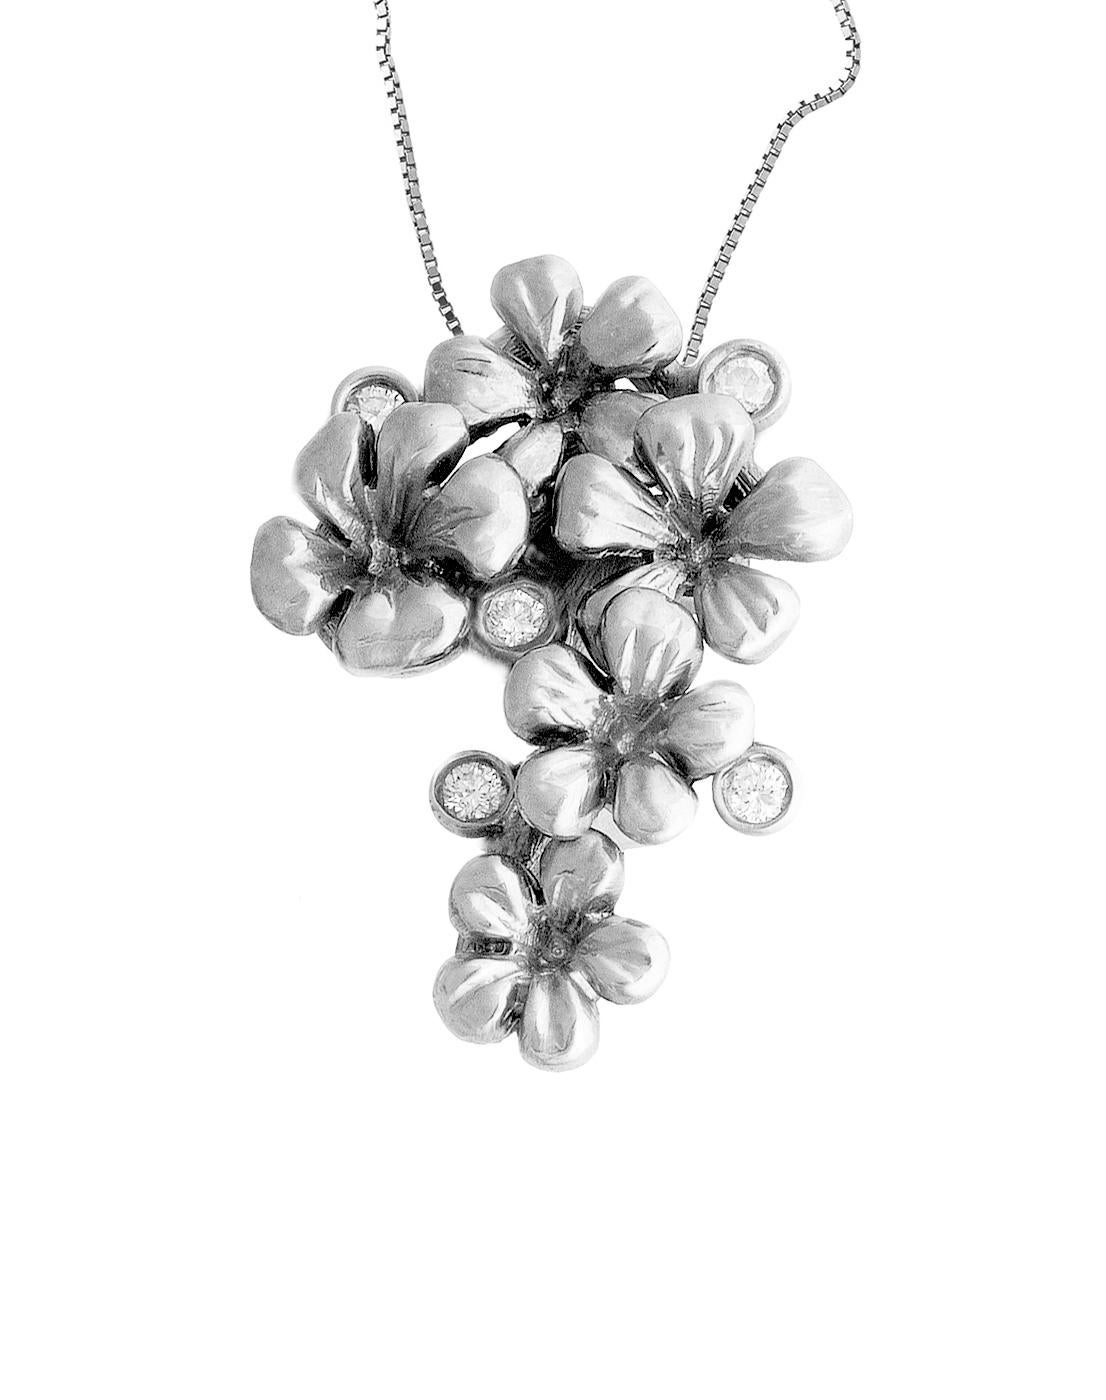 The 18 karat white gold Plum Blossom Modern style drop brooch features 5 round natural diamonds and a detachable natural quartz (13 mm). This jewelry collection has been featured in Vogue UA and Harper's Bazaar reviews. The diamonds are top quality